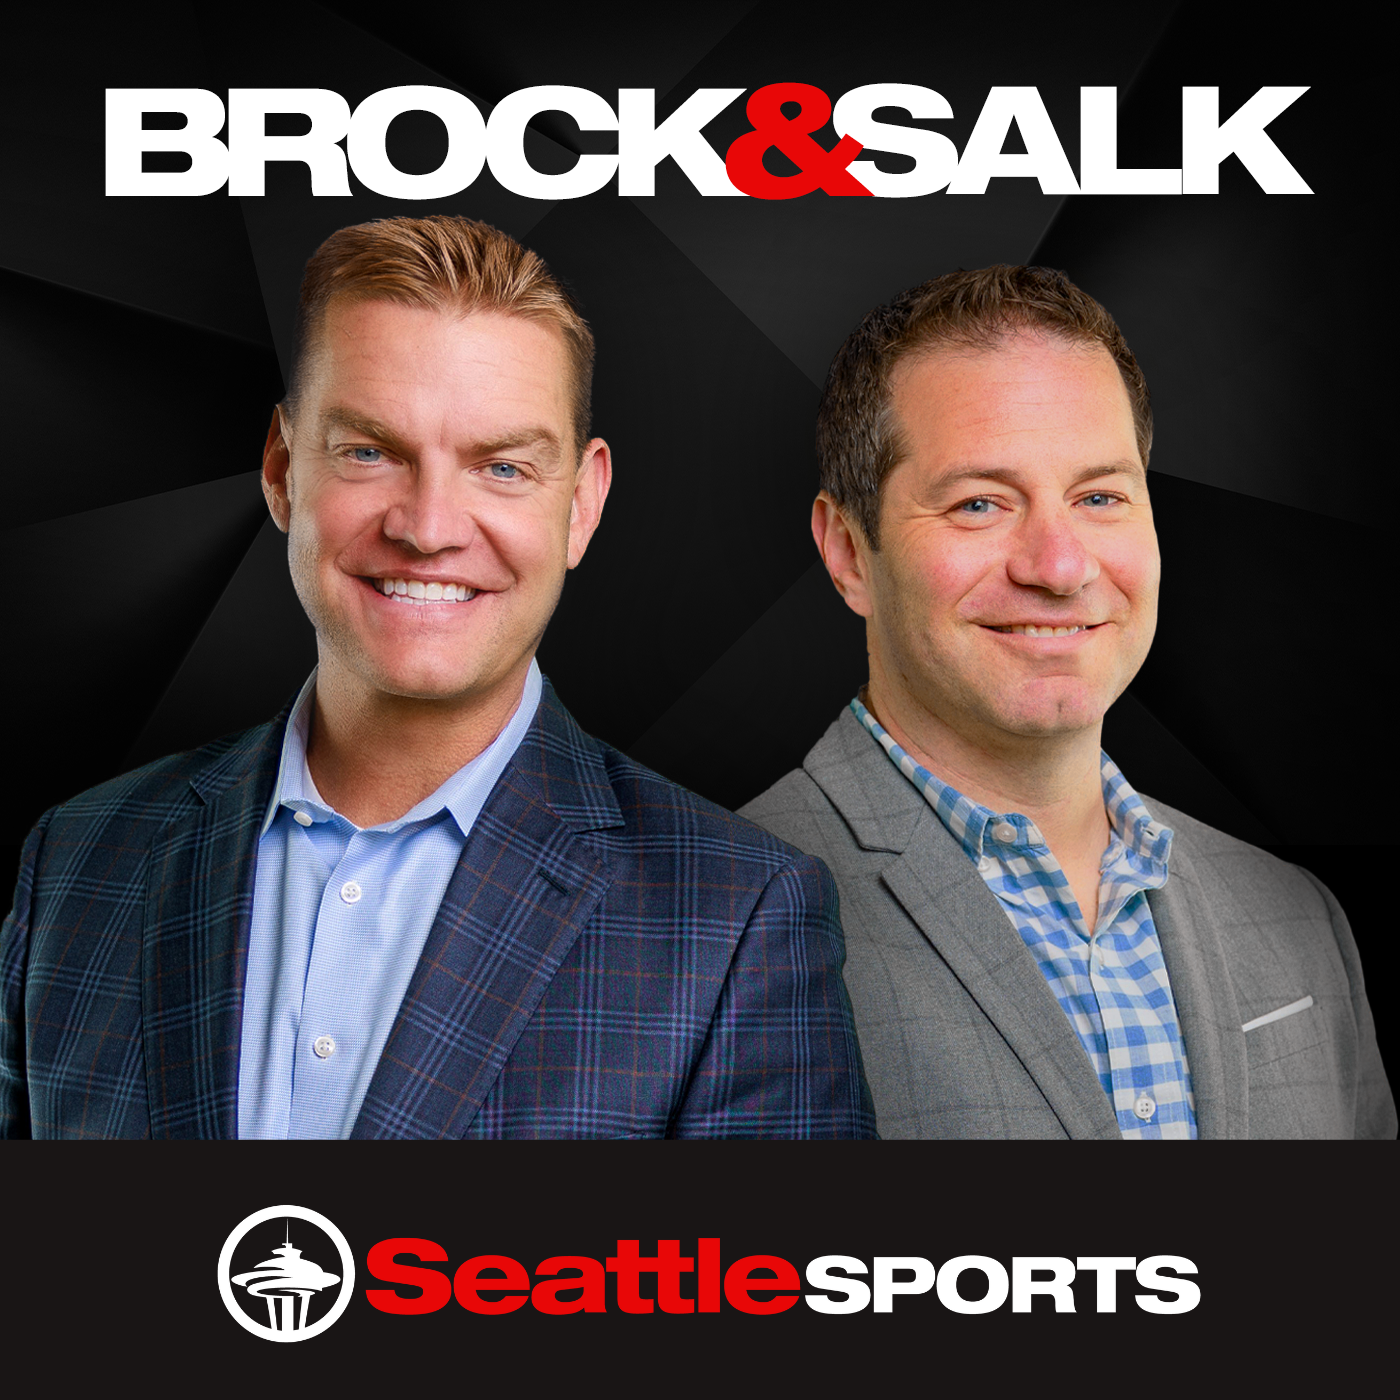 Hour 2-Mariners baseball is back, who will take the next step? Brock's 'Blue 88'